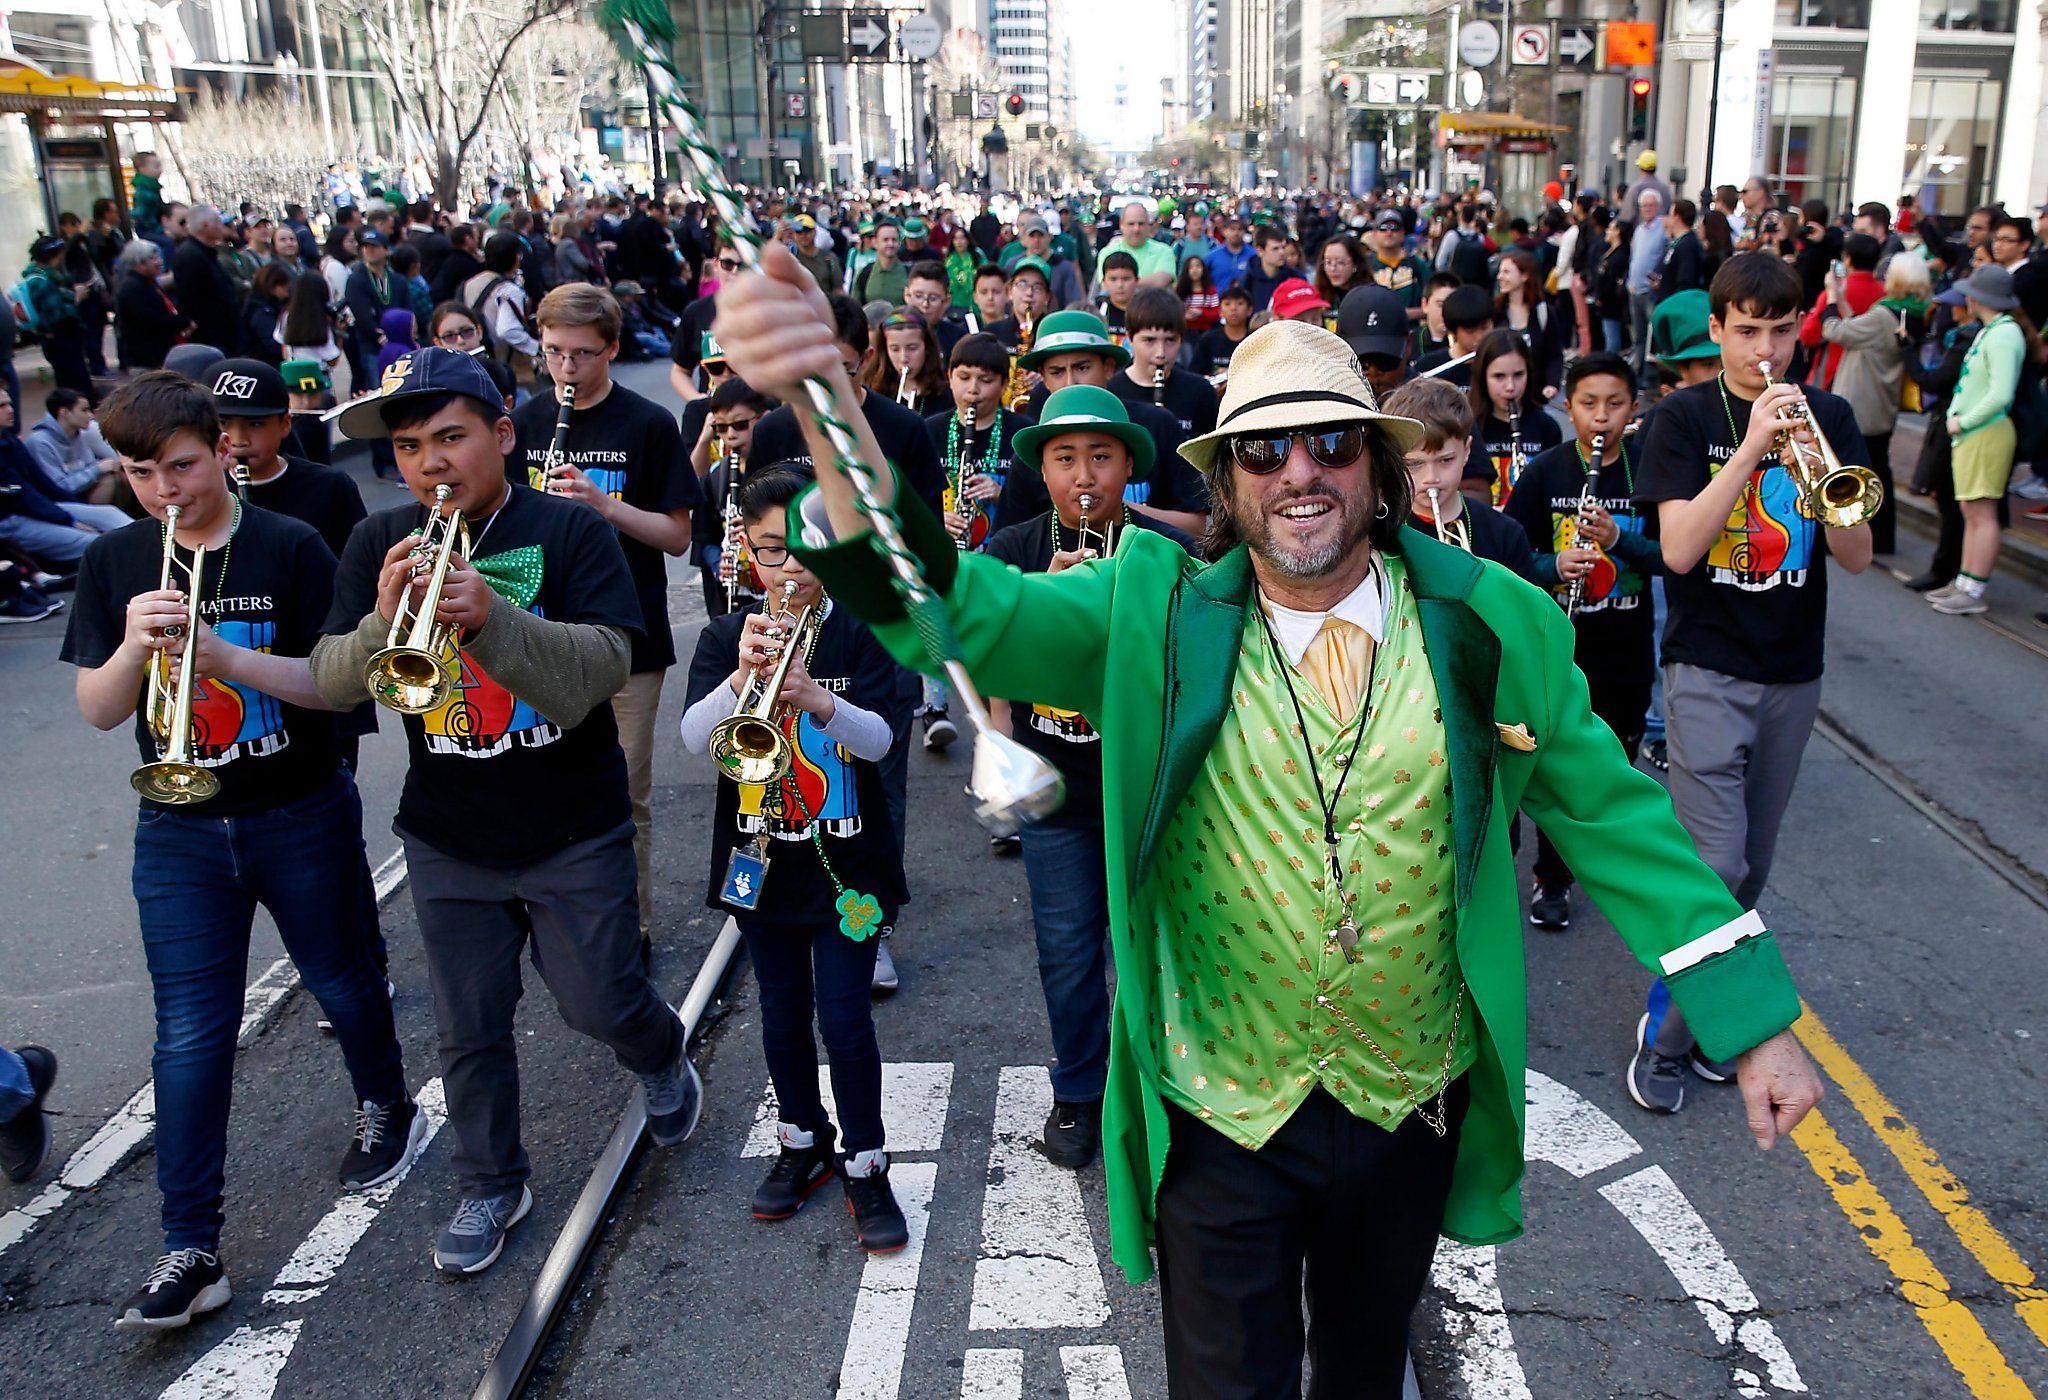 Everyone is Irish for San Francisco's St. Patrick's Day Parade